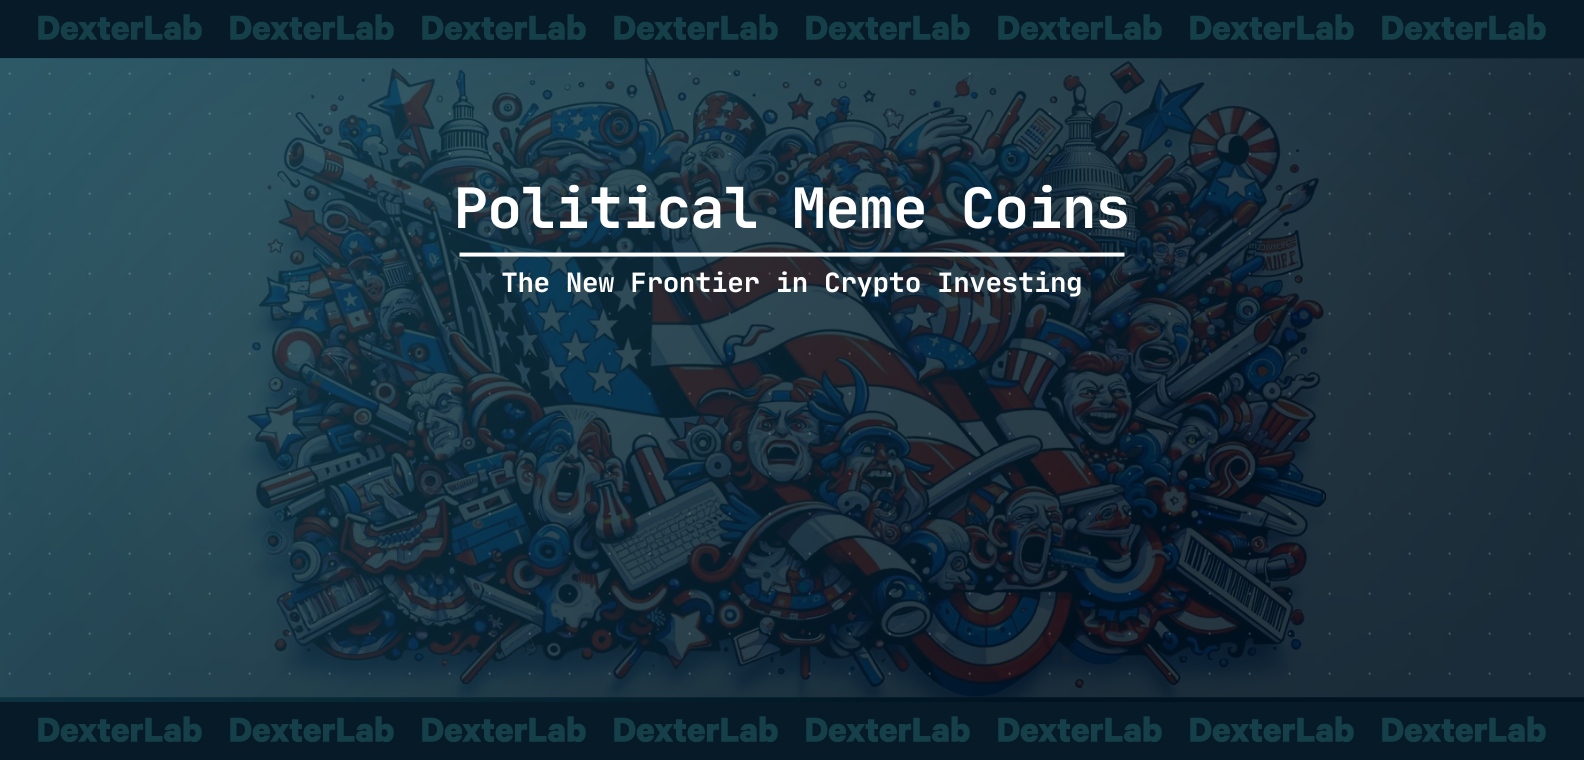 Political Meme Coins: The New Frontier in Crypto Investing